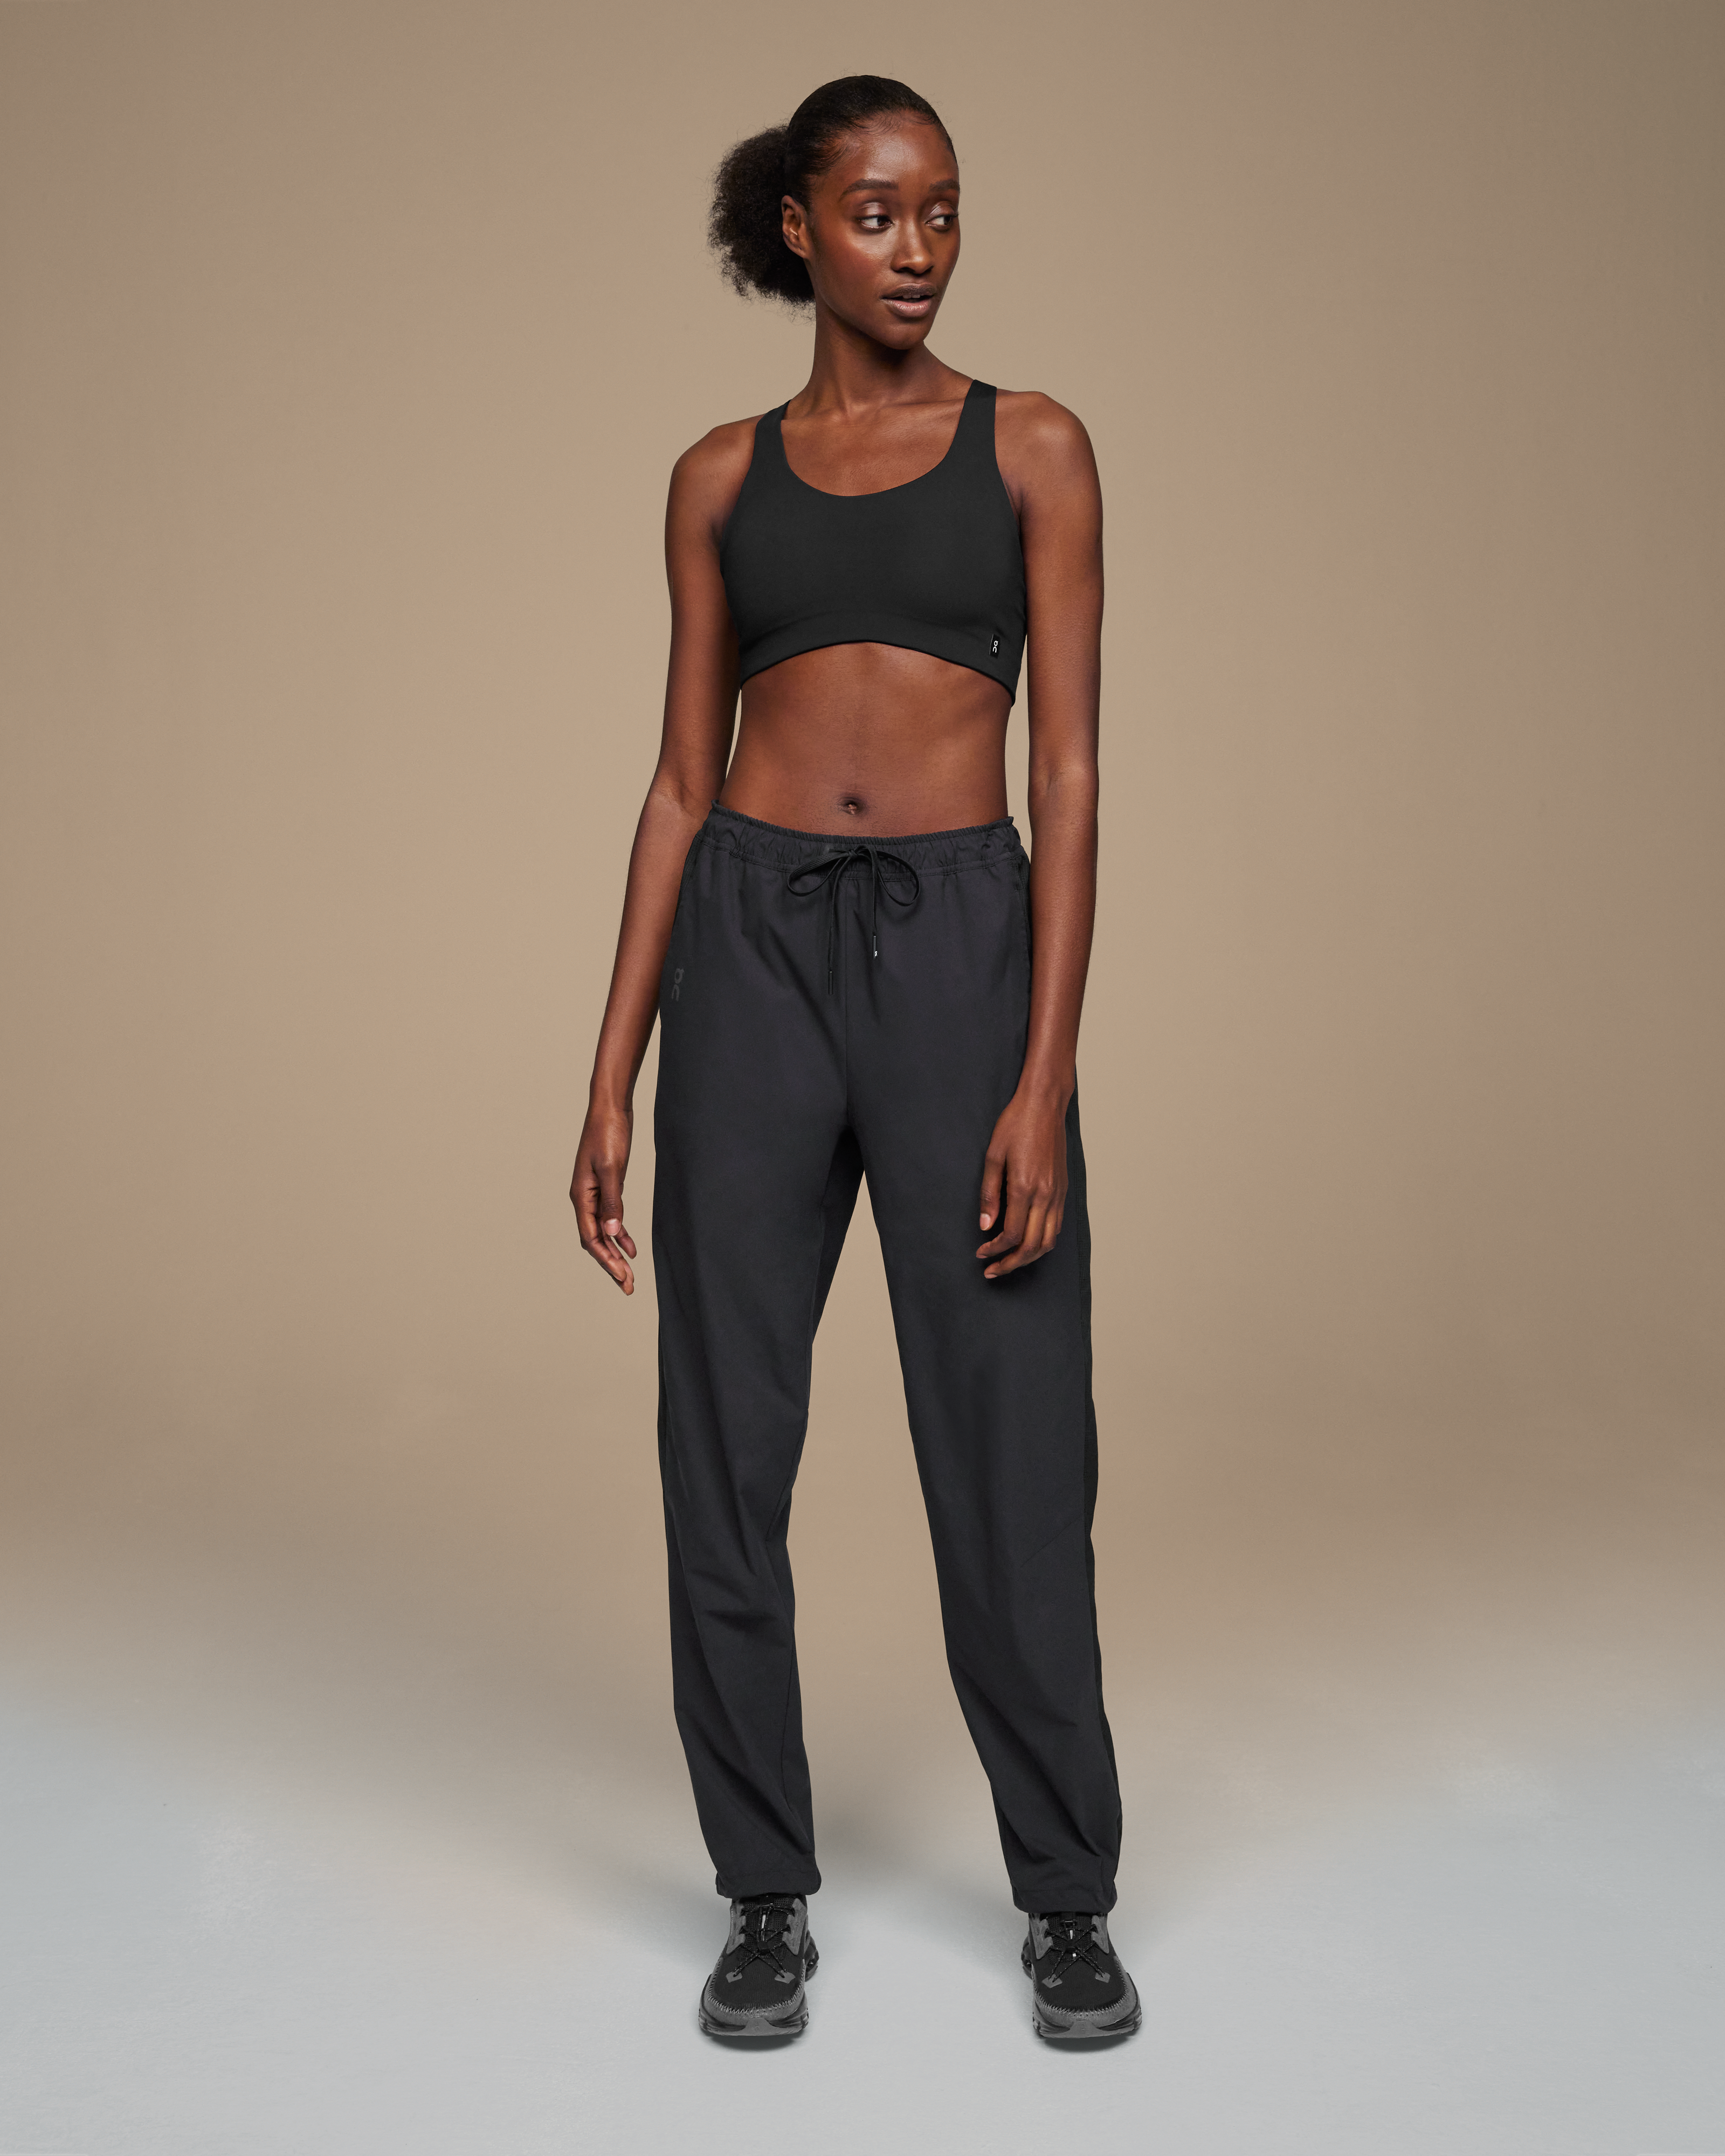 Buy DYWER Women's Skinny Fit Yoga Trackpants for Girls & Women